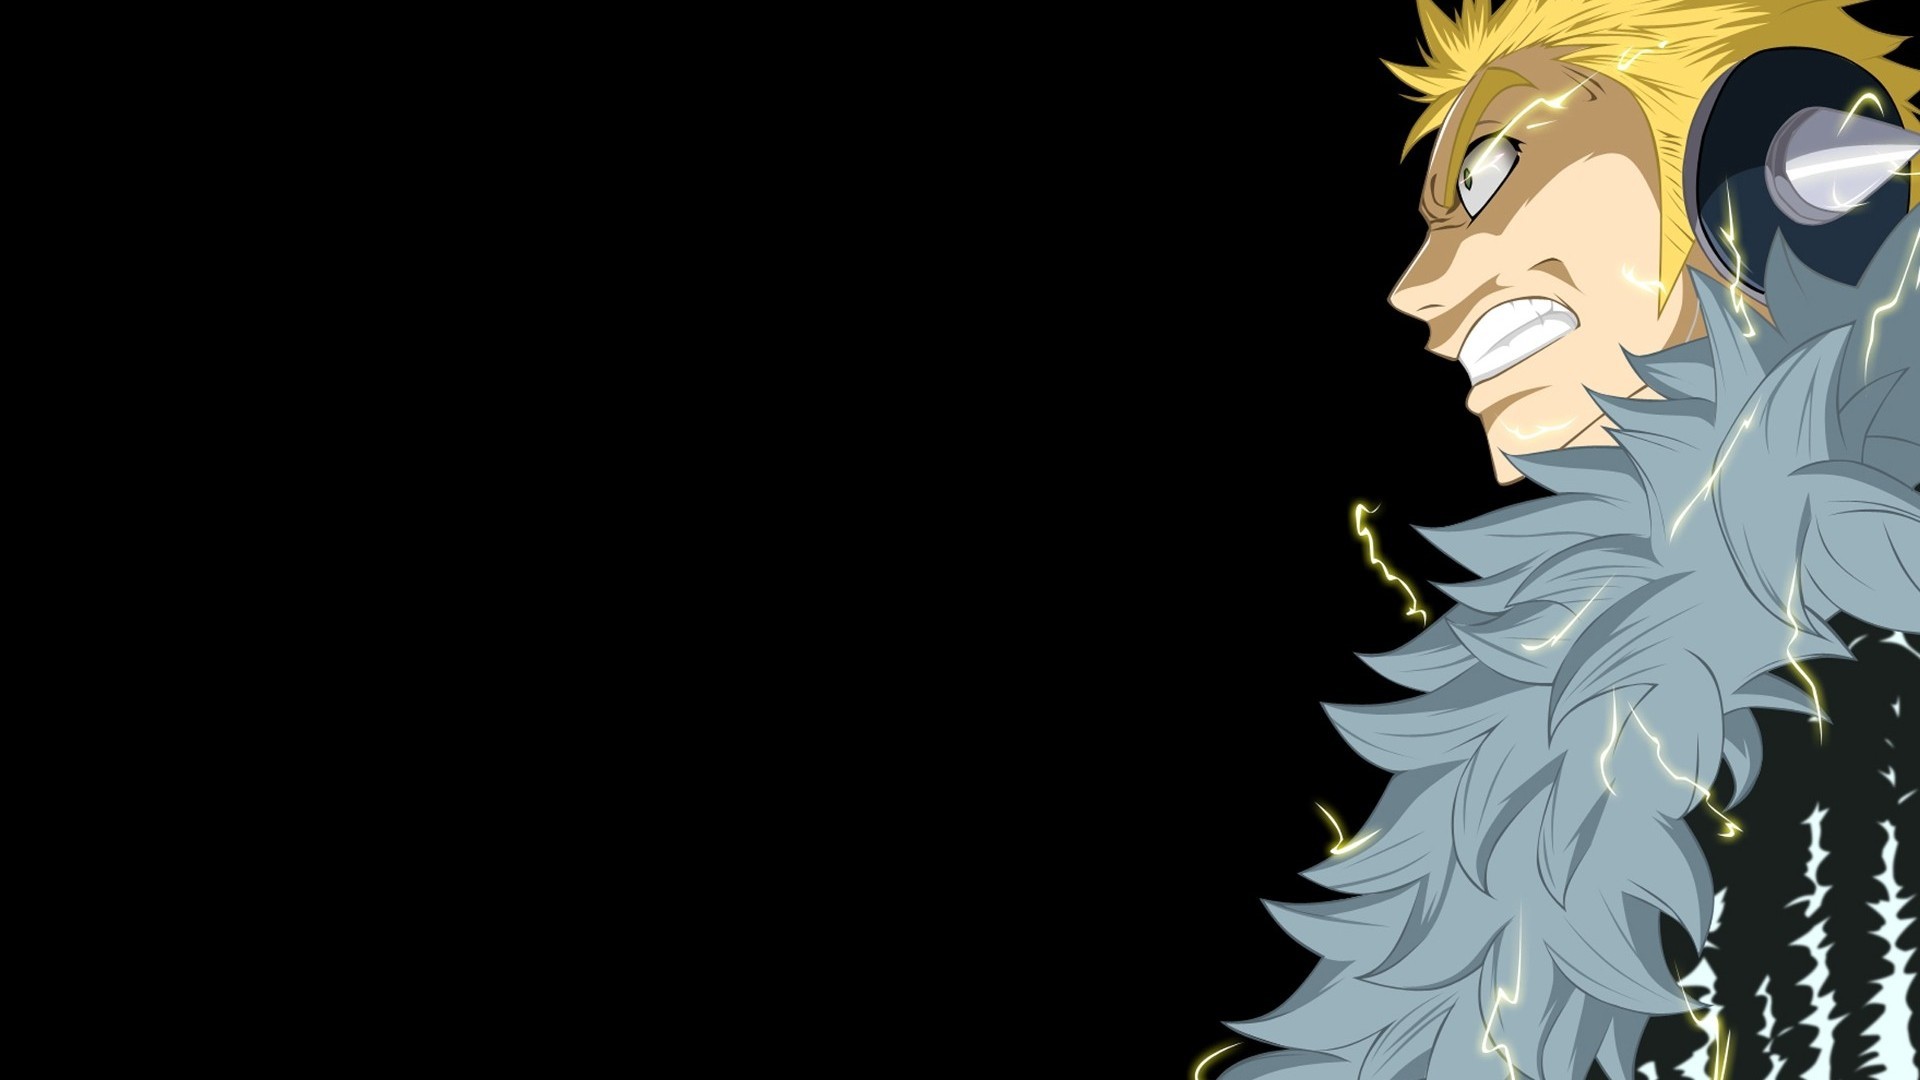 1920x1080 1000 images about Laxus Dreyar on Wallpaper Gallery | Fairy tail .